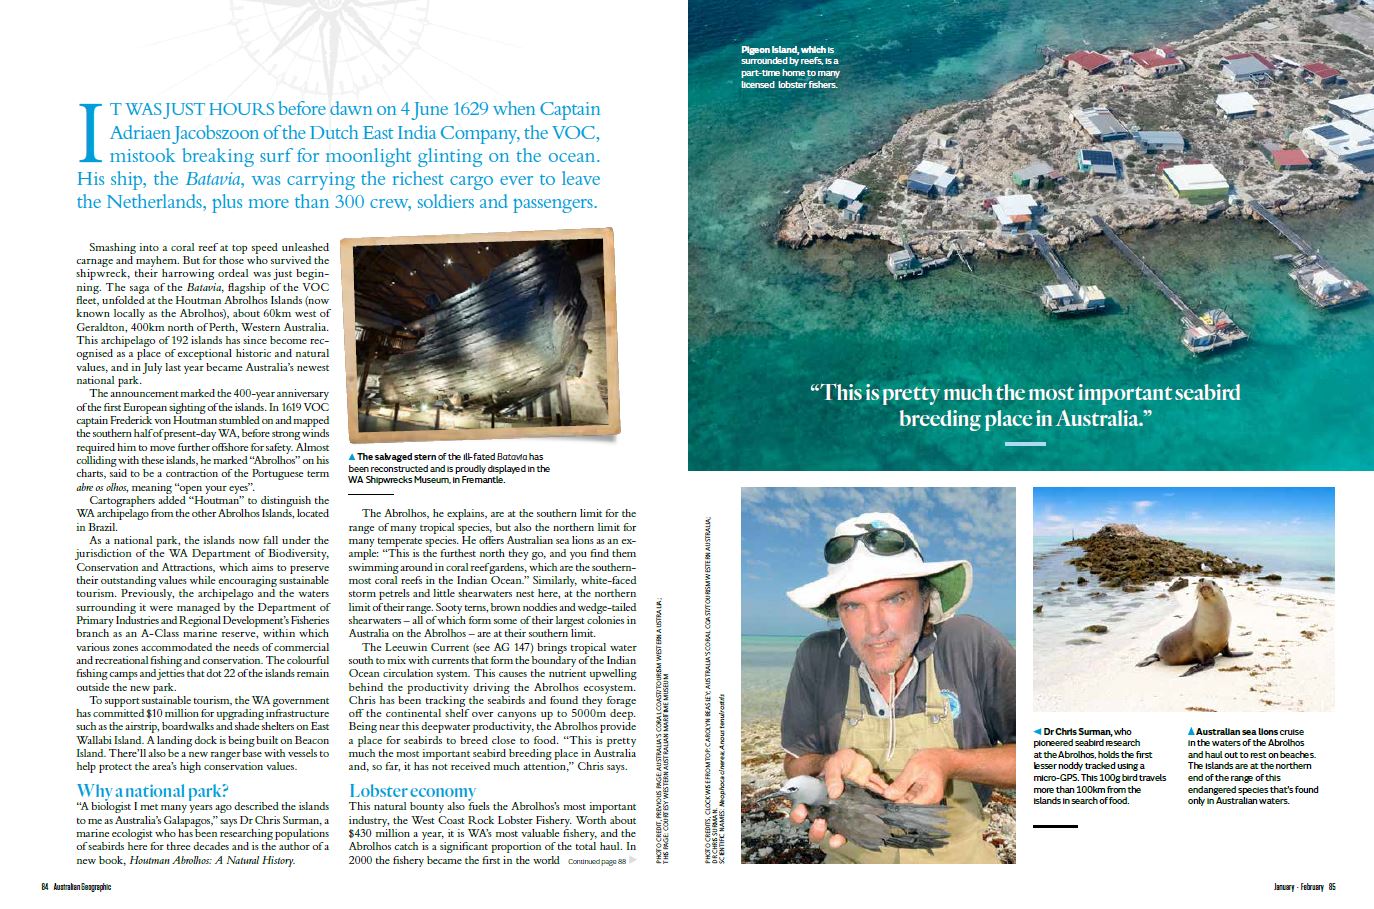 Australian Geographic - Abrolhos Islands feature